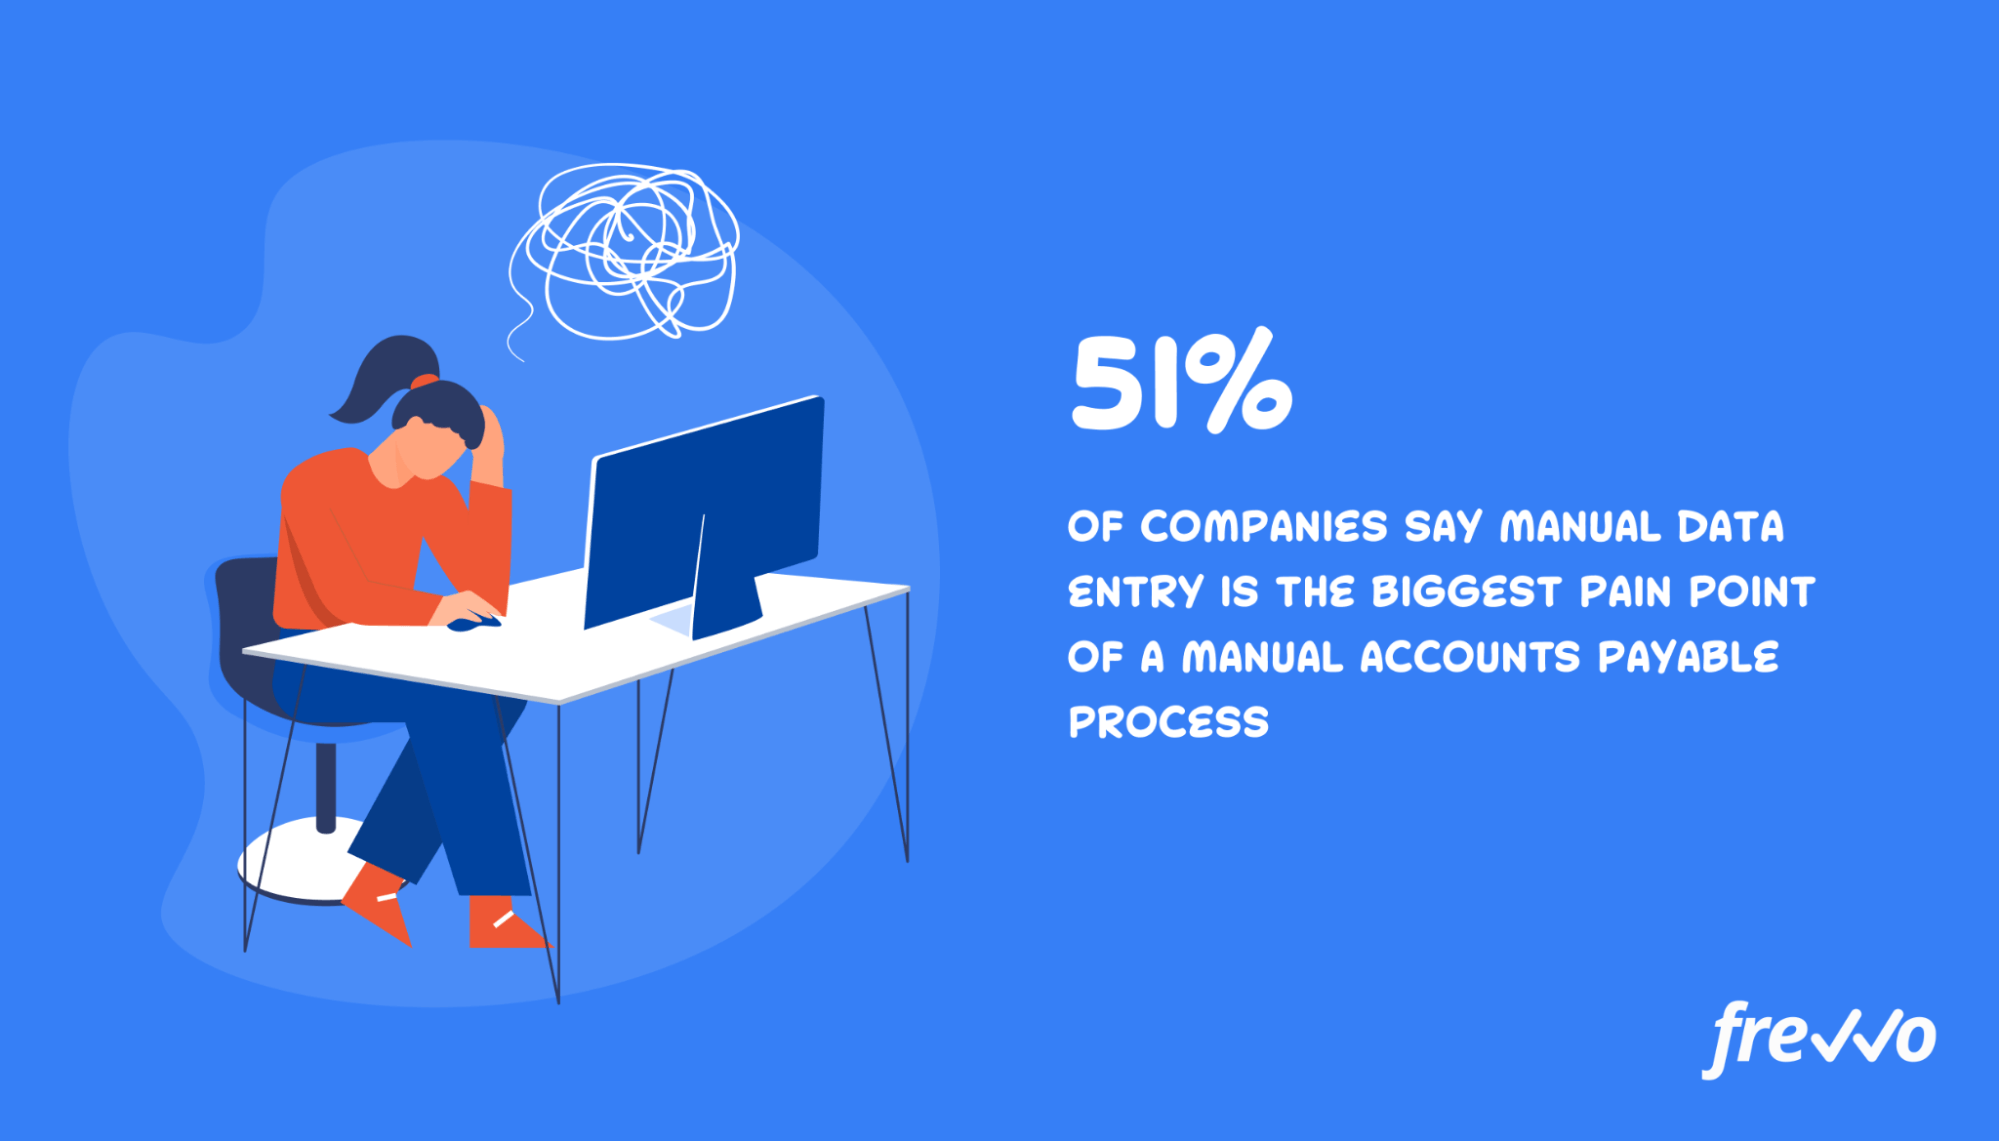 51% of companies with a manual accounts payable process say manual data entry is their biggest pain point